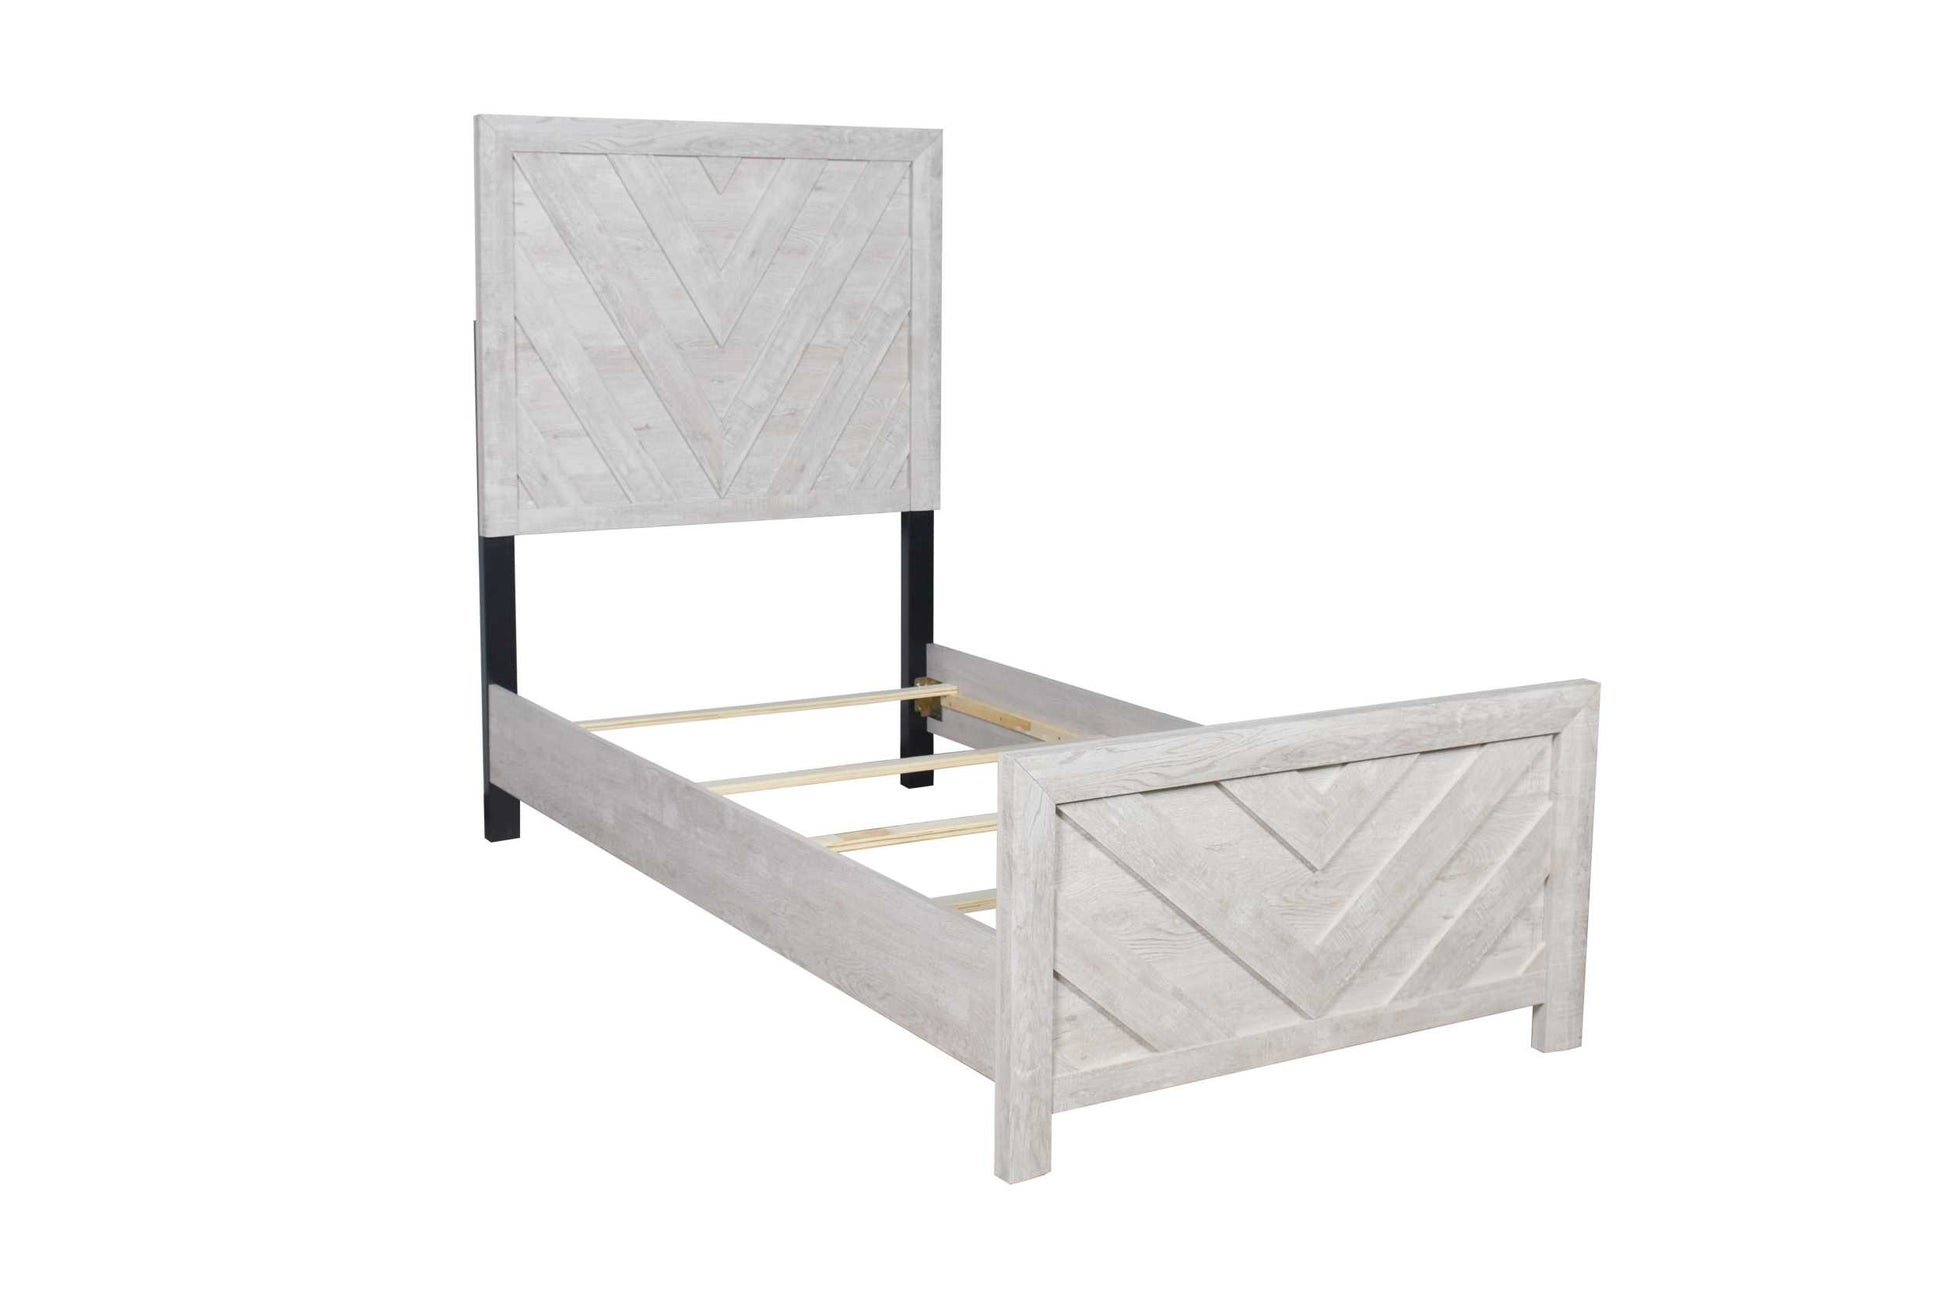 Denver Modern Style Twin Bed Made with Wood in